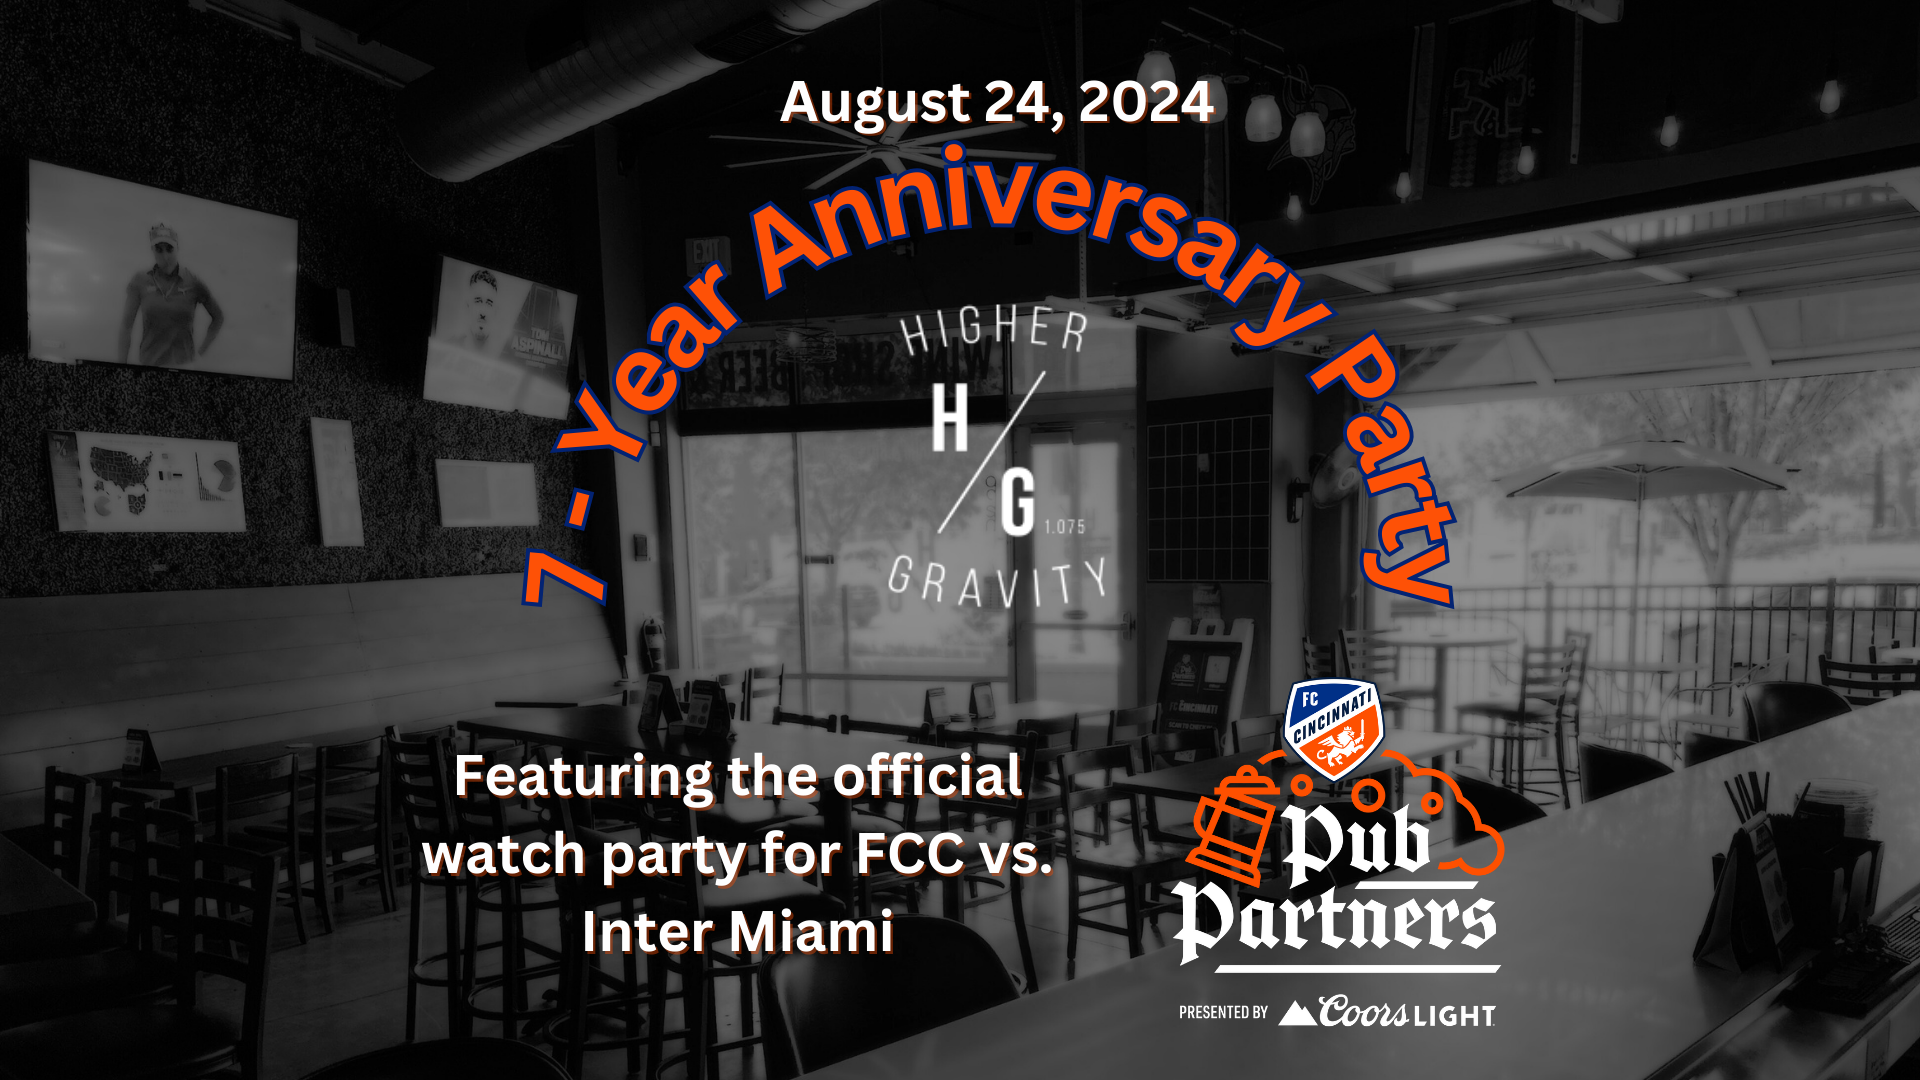 Join HG Northside for our 7-Year Anniversary Party and the official watch party for the FCC vs. Inter Miami game!